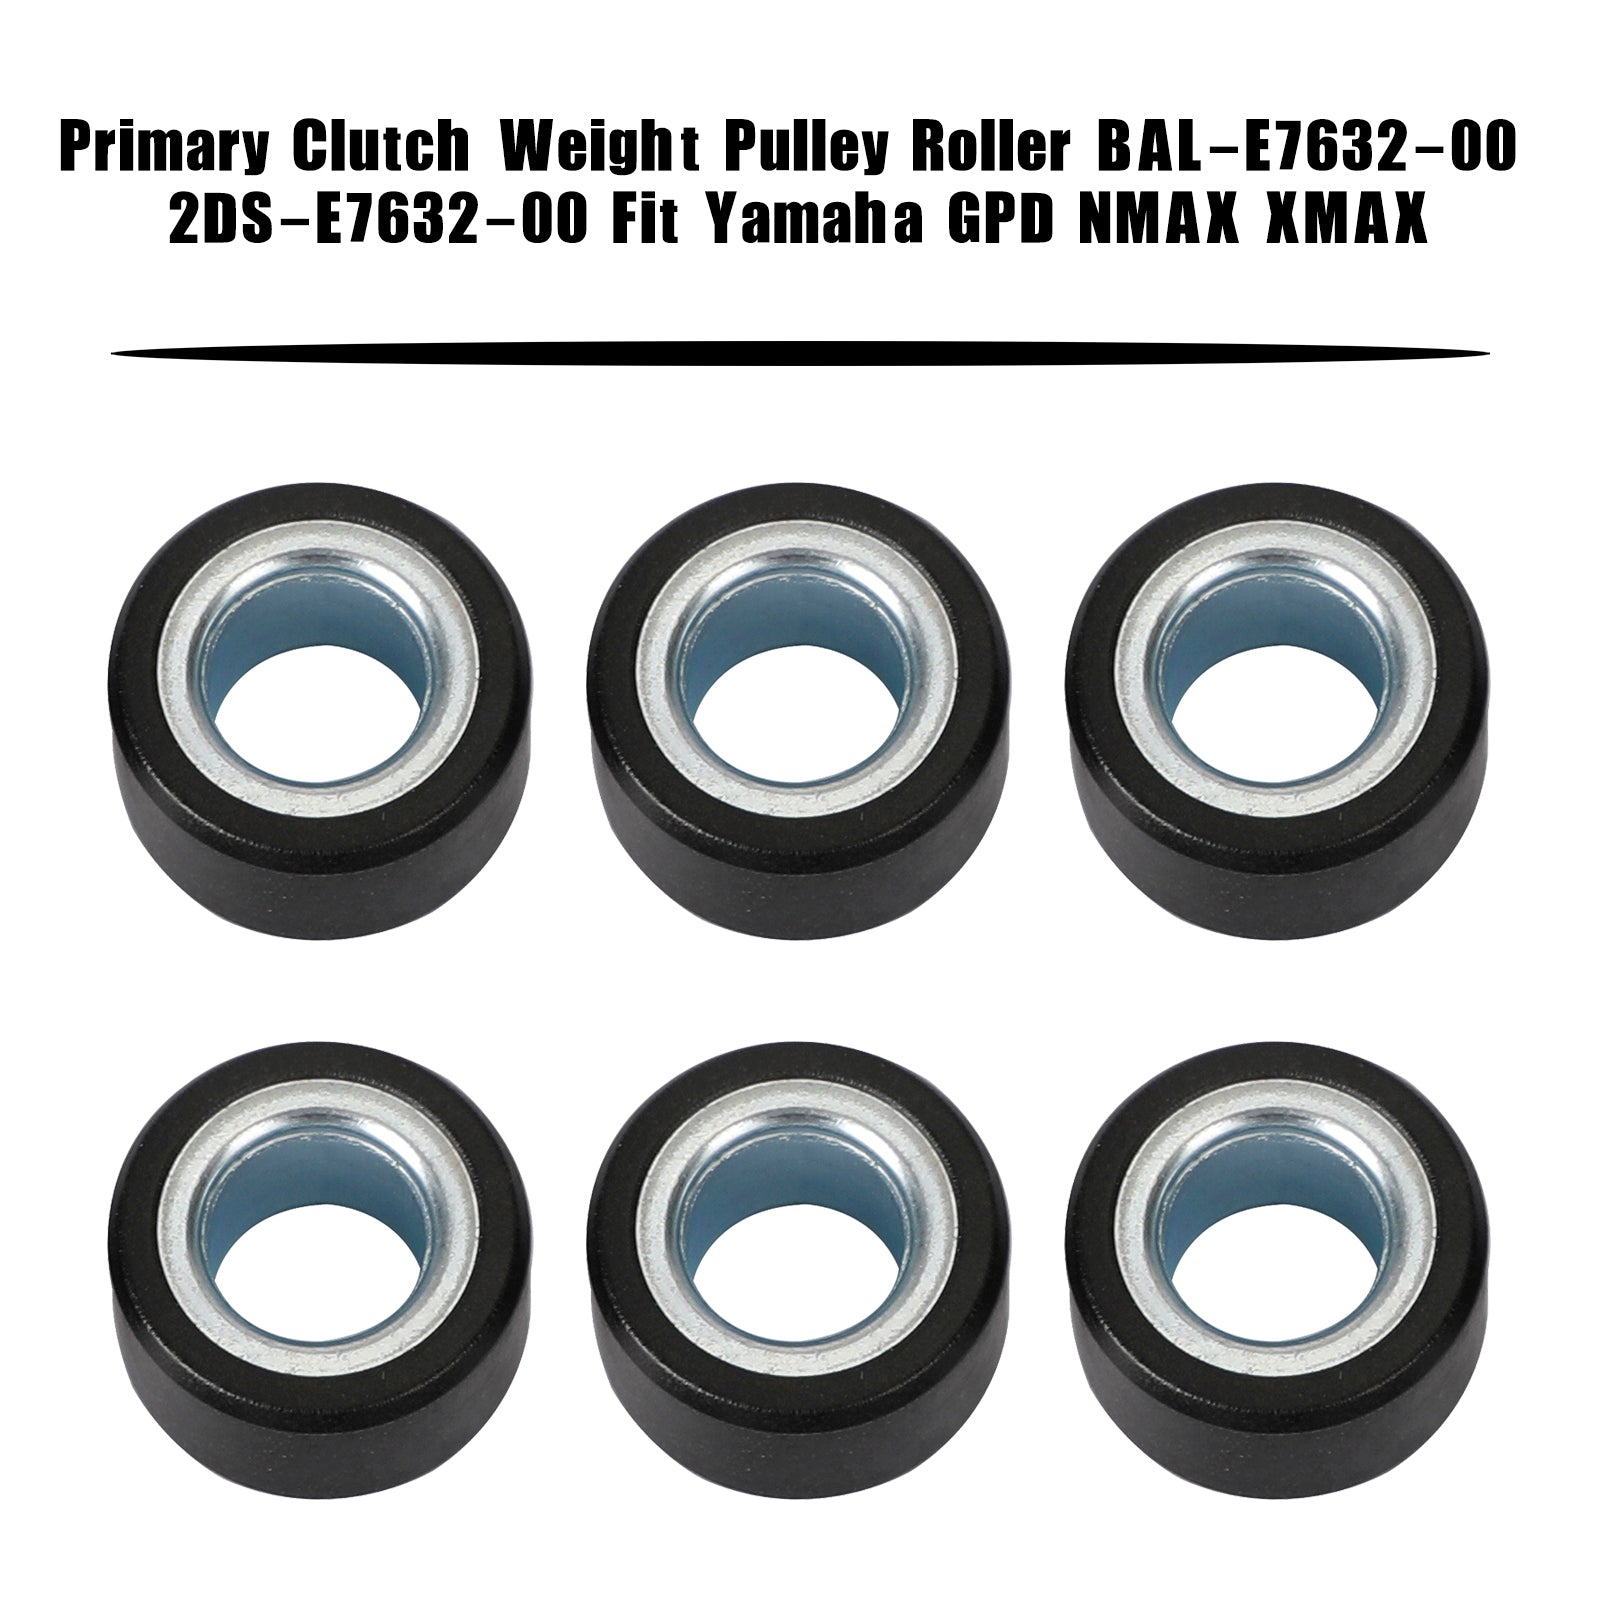 Weight Pulley Roller Primary Clutch Bal-E7632-00 For Yamaha Gpd125-A Nmax125 Xma